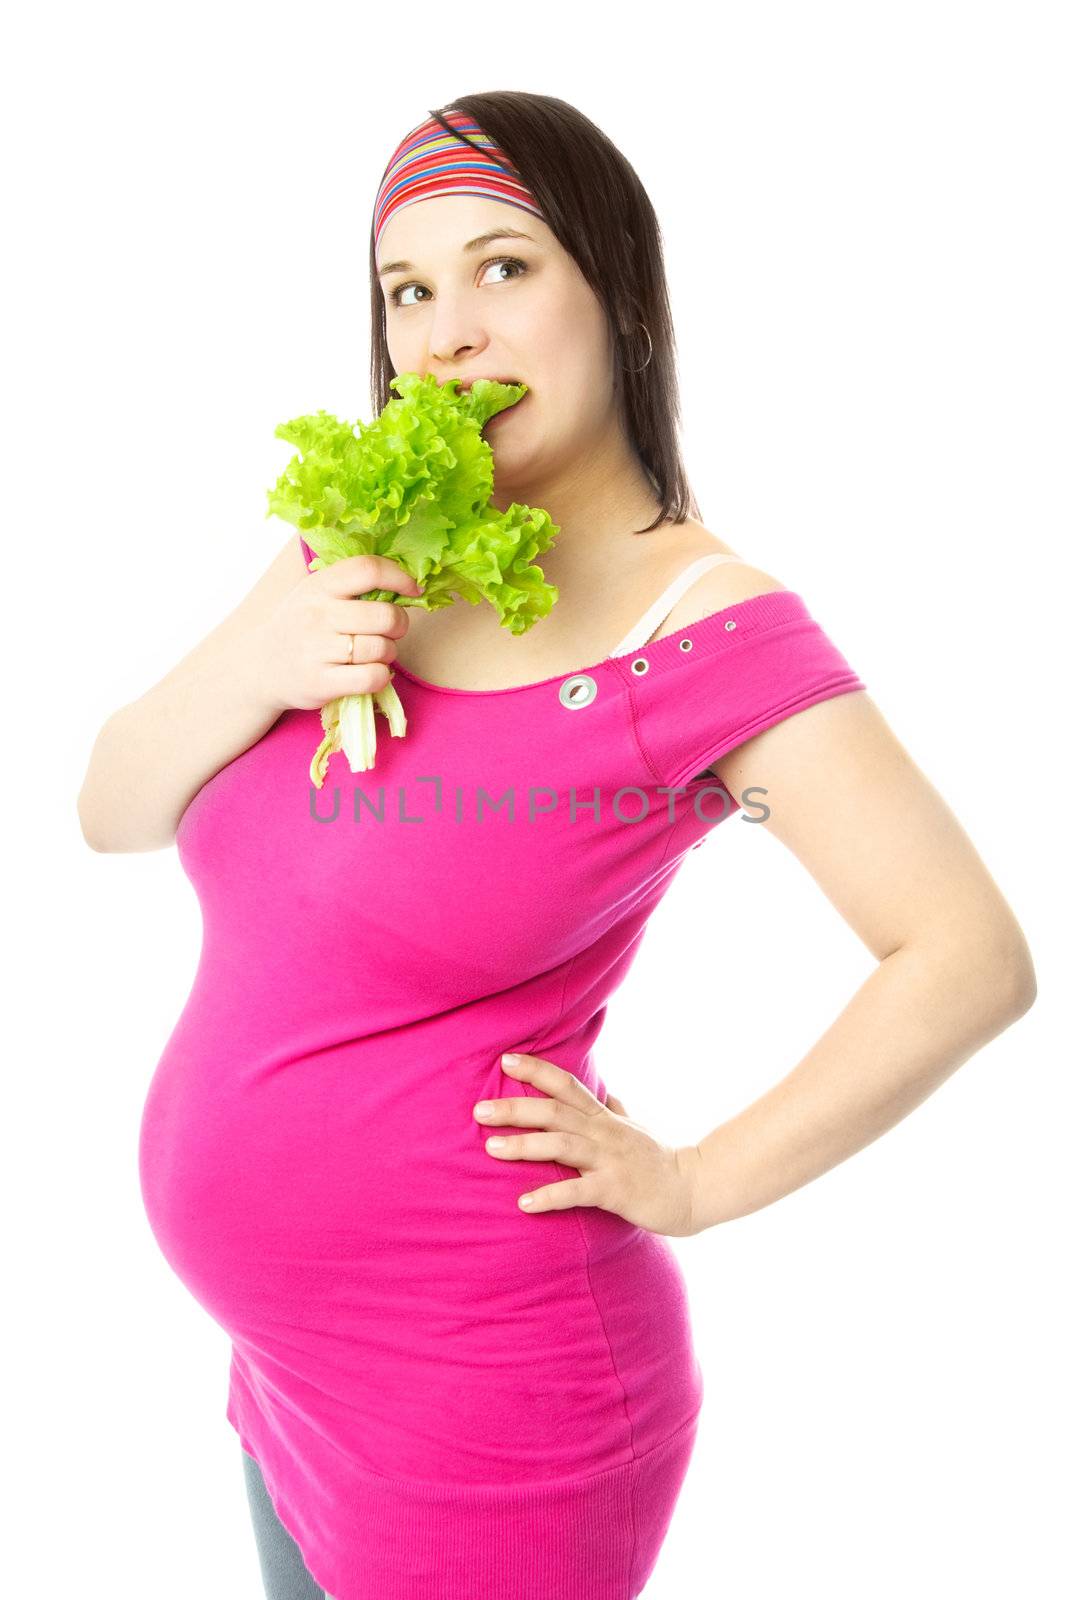 pregnant woman eating salad by lanak